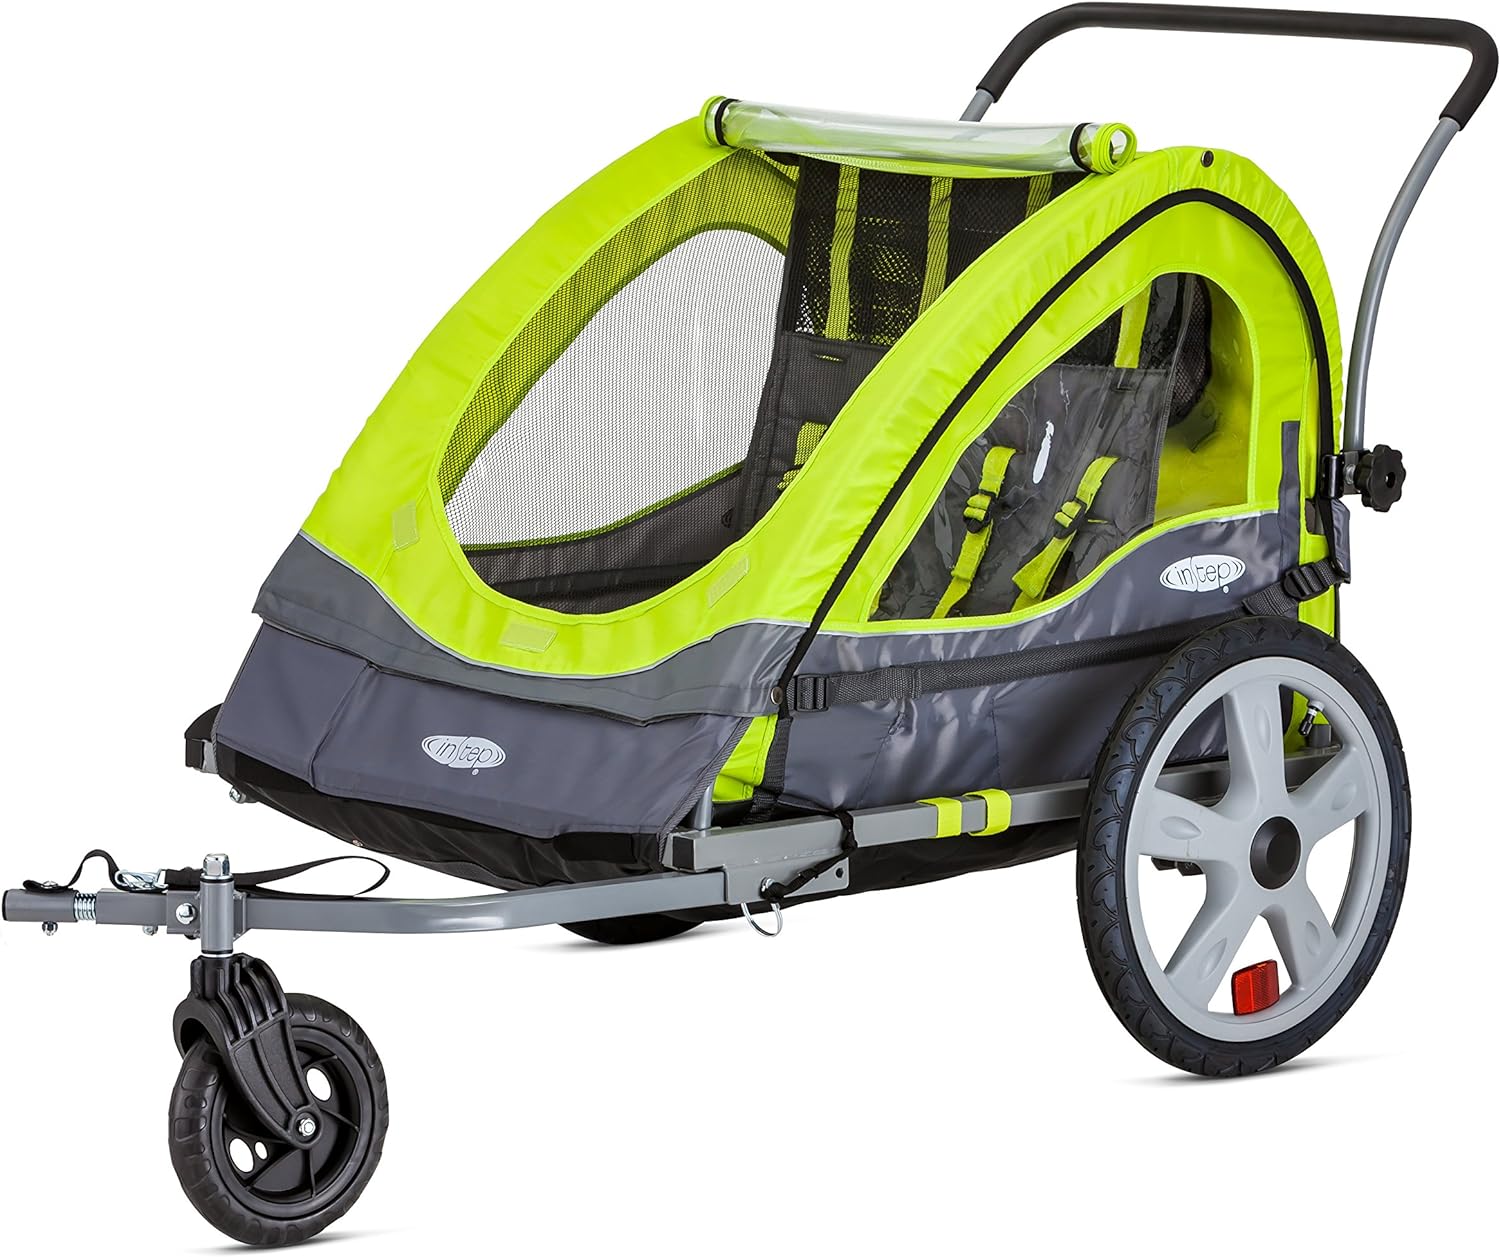 Instep Quick-N-EZ Double Tow Behind Bike Trailer Review